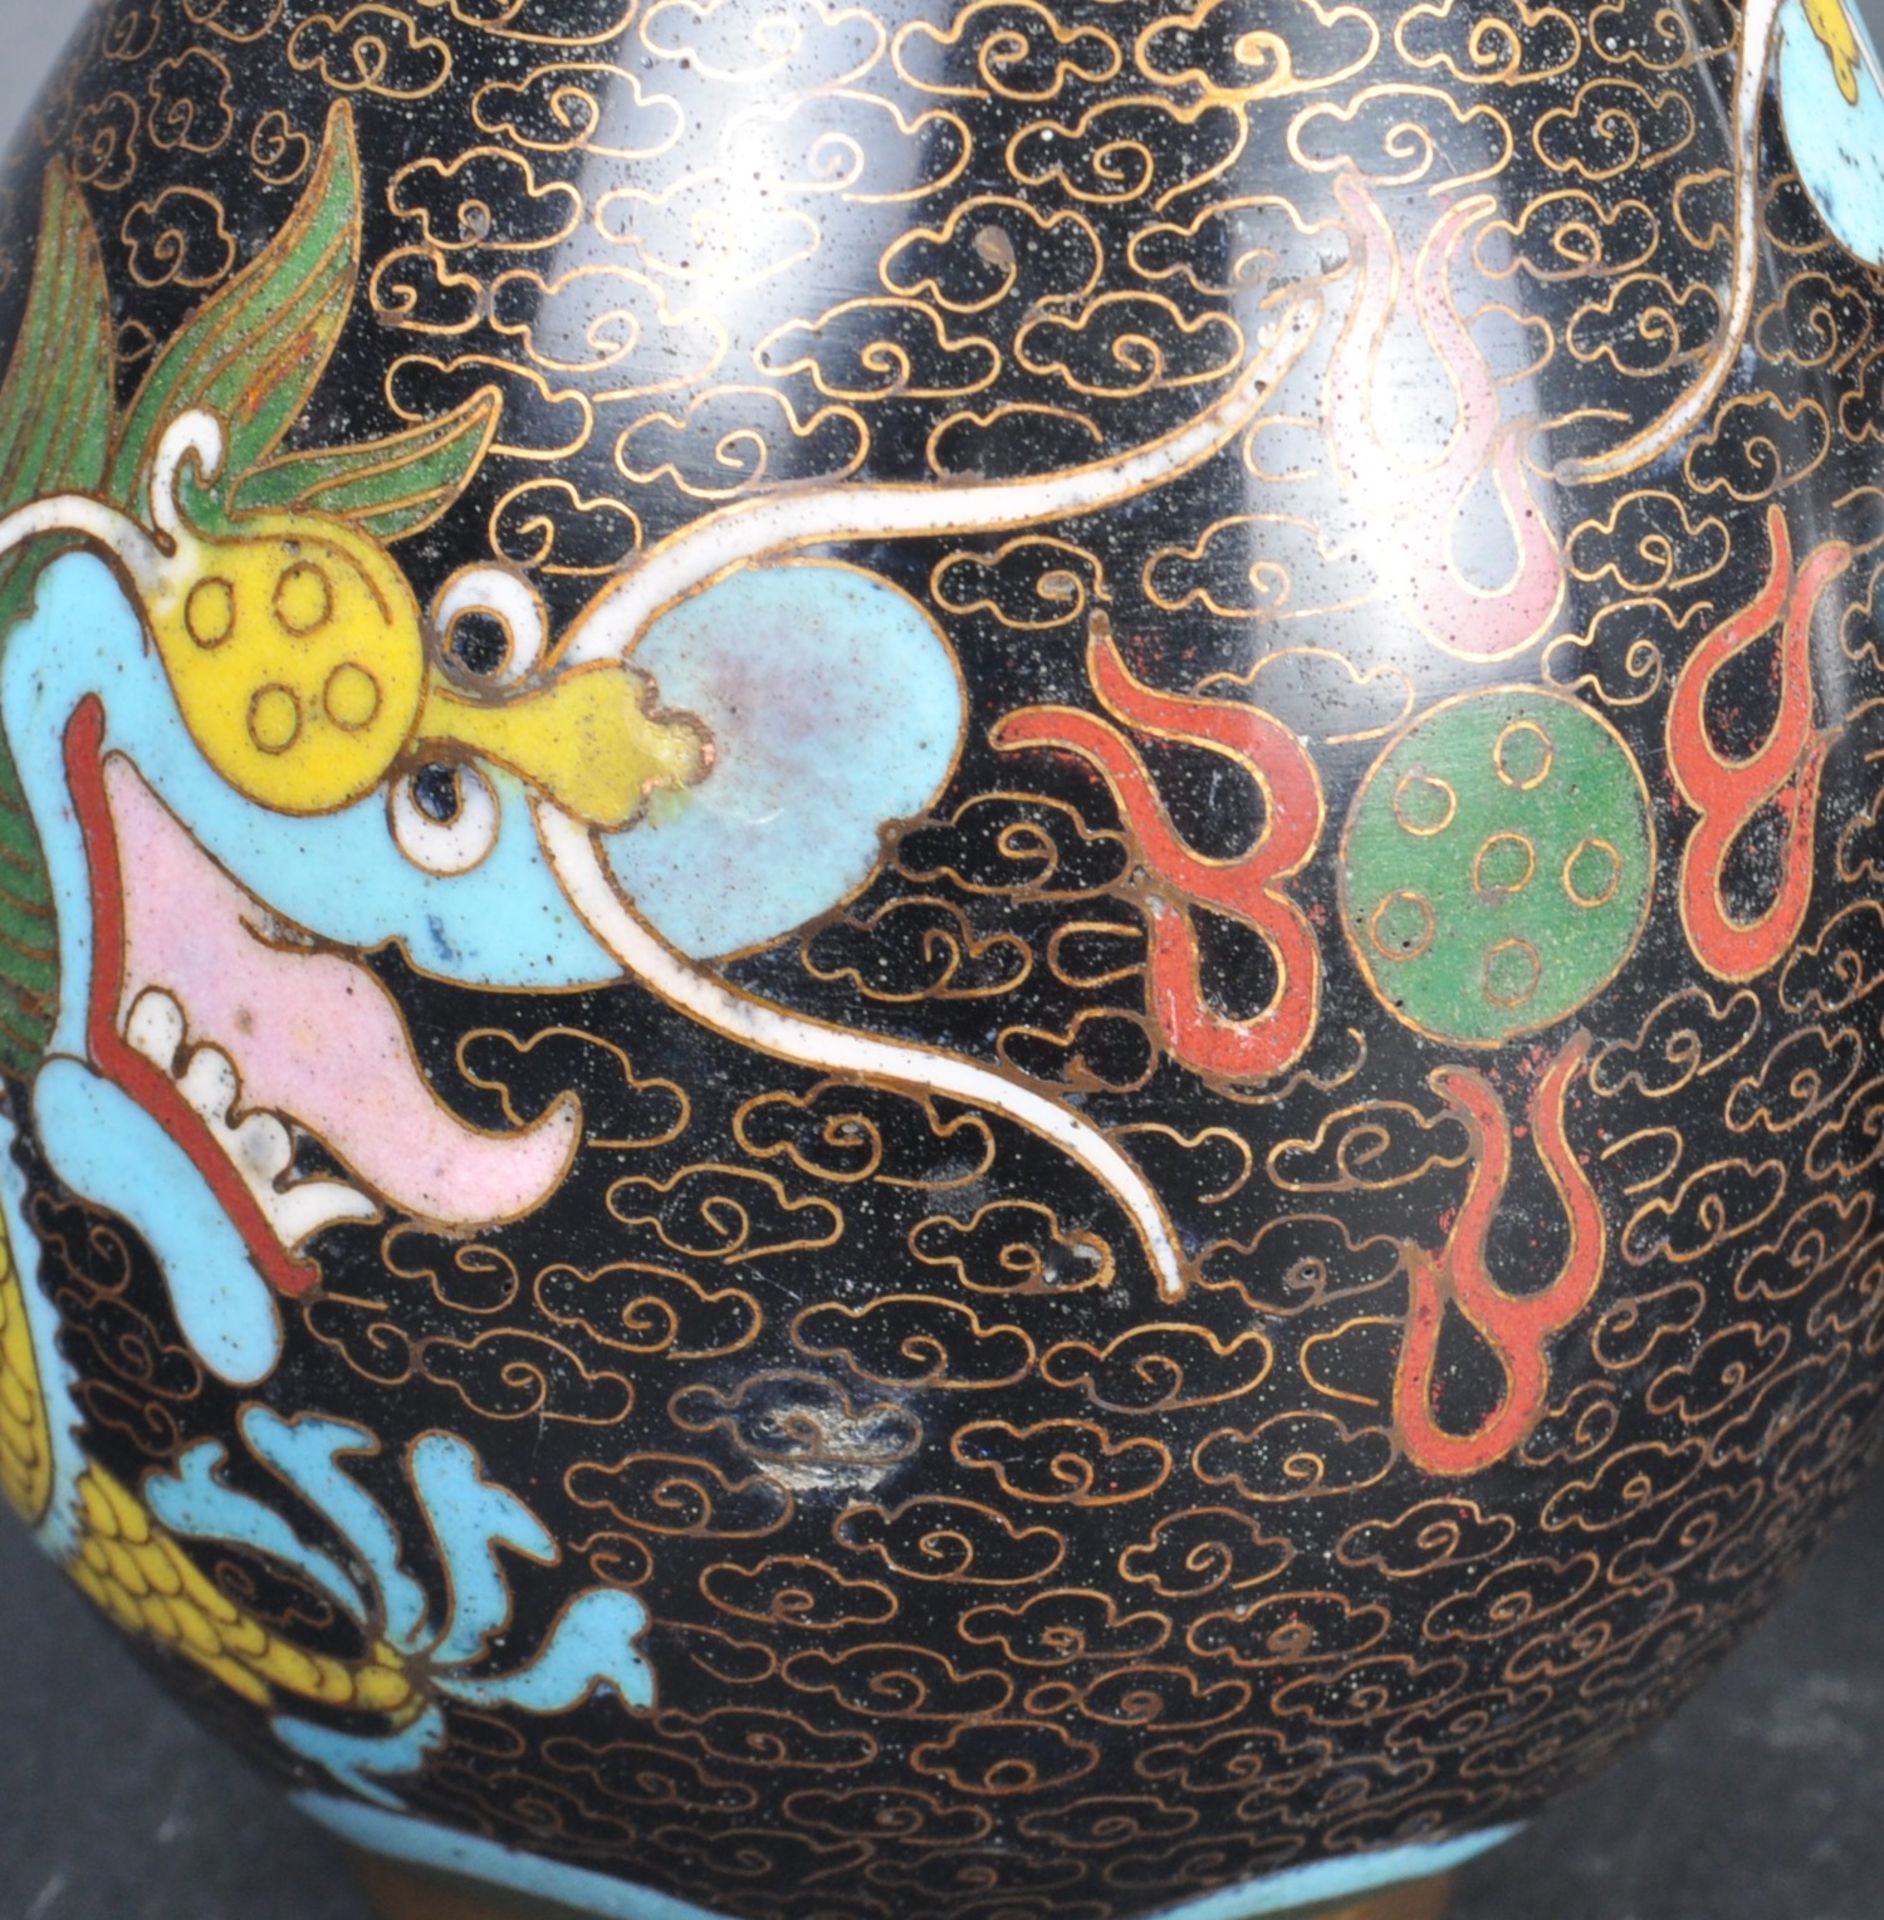 PAIR OF 19TH CENTURY CHINESE CLOISONNE DRAGON VASES - Image 6 of 7